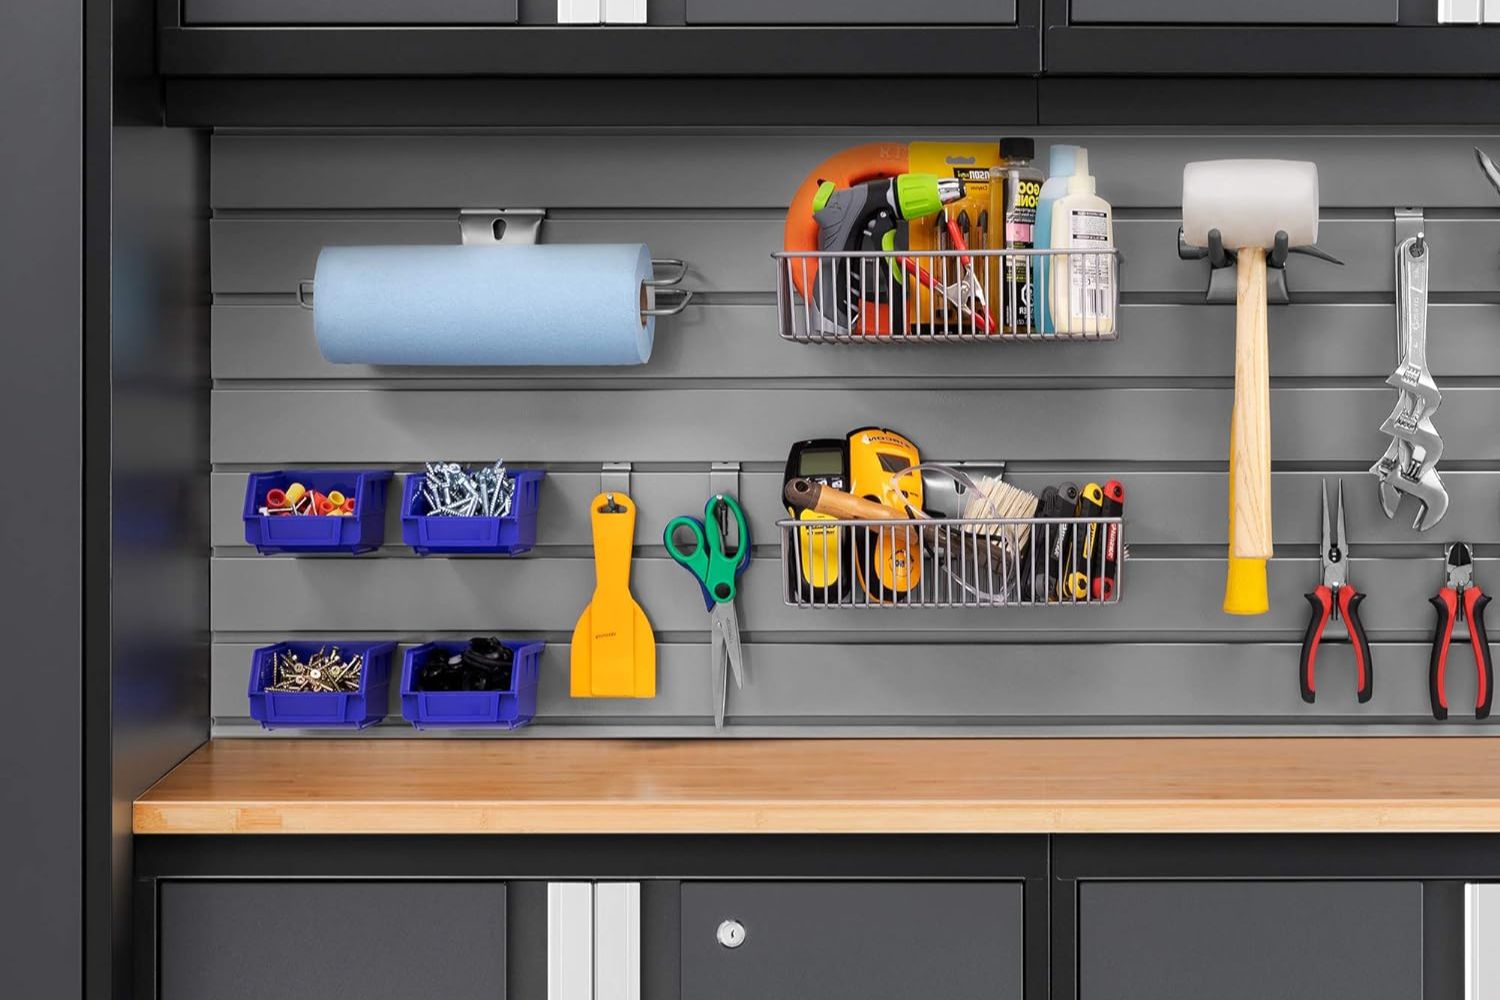 The best garage storage system installed in a garage and filled with a huge variety of tools and utensils.